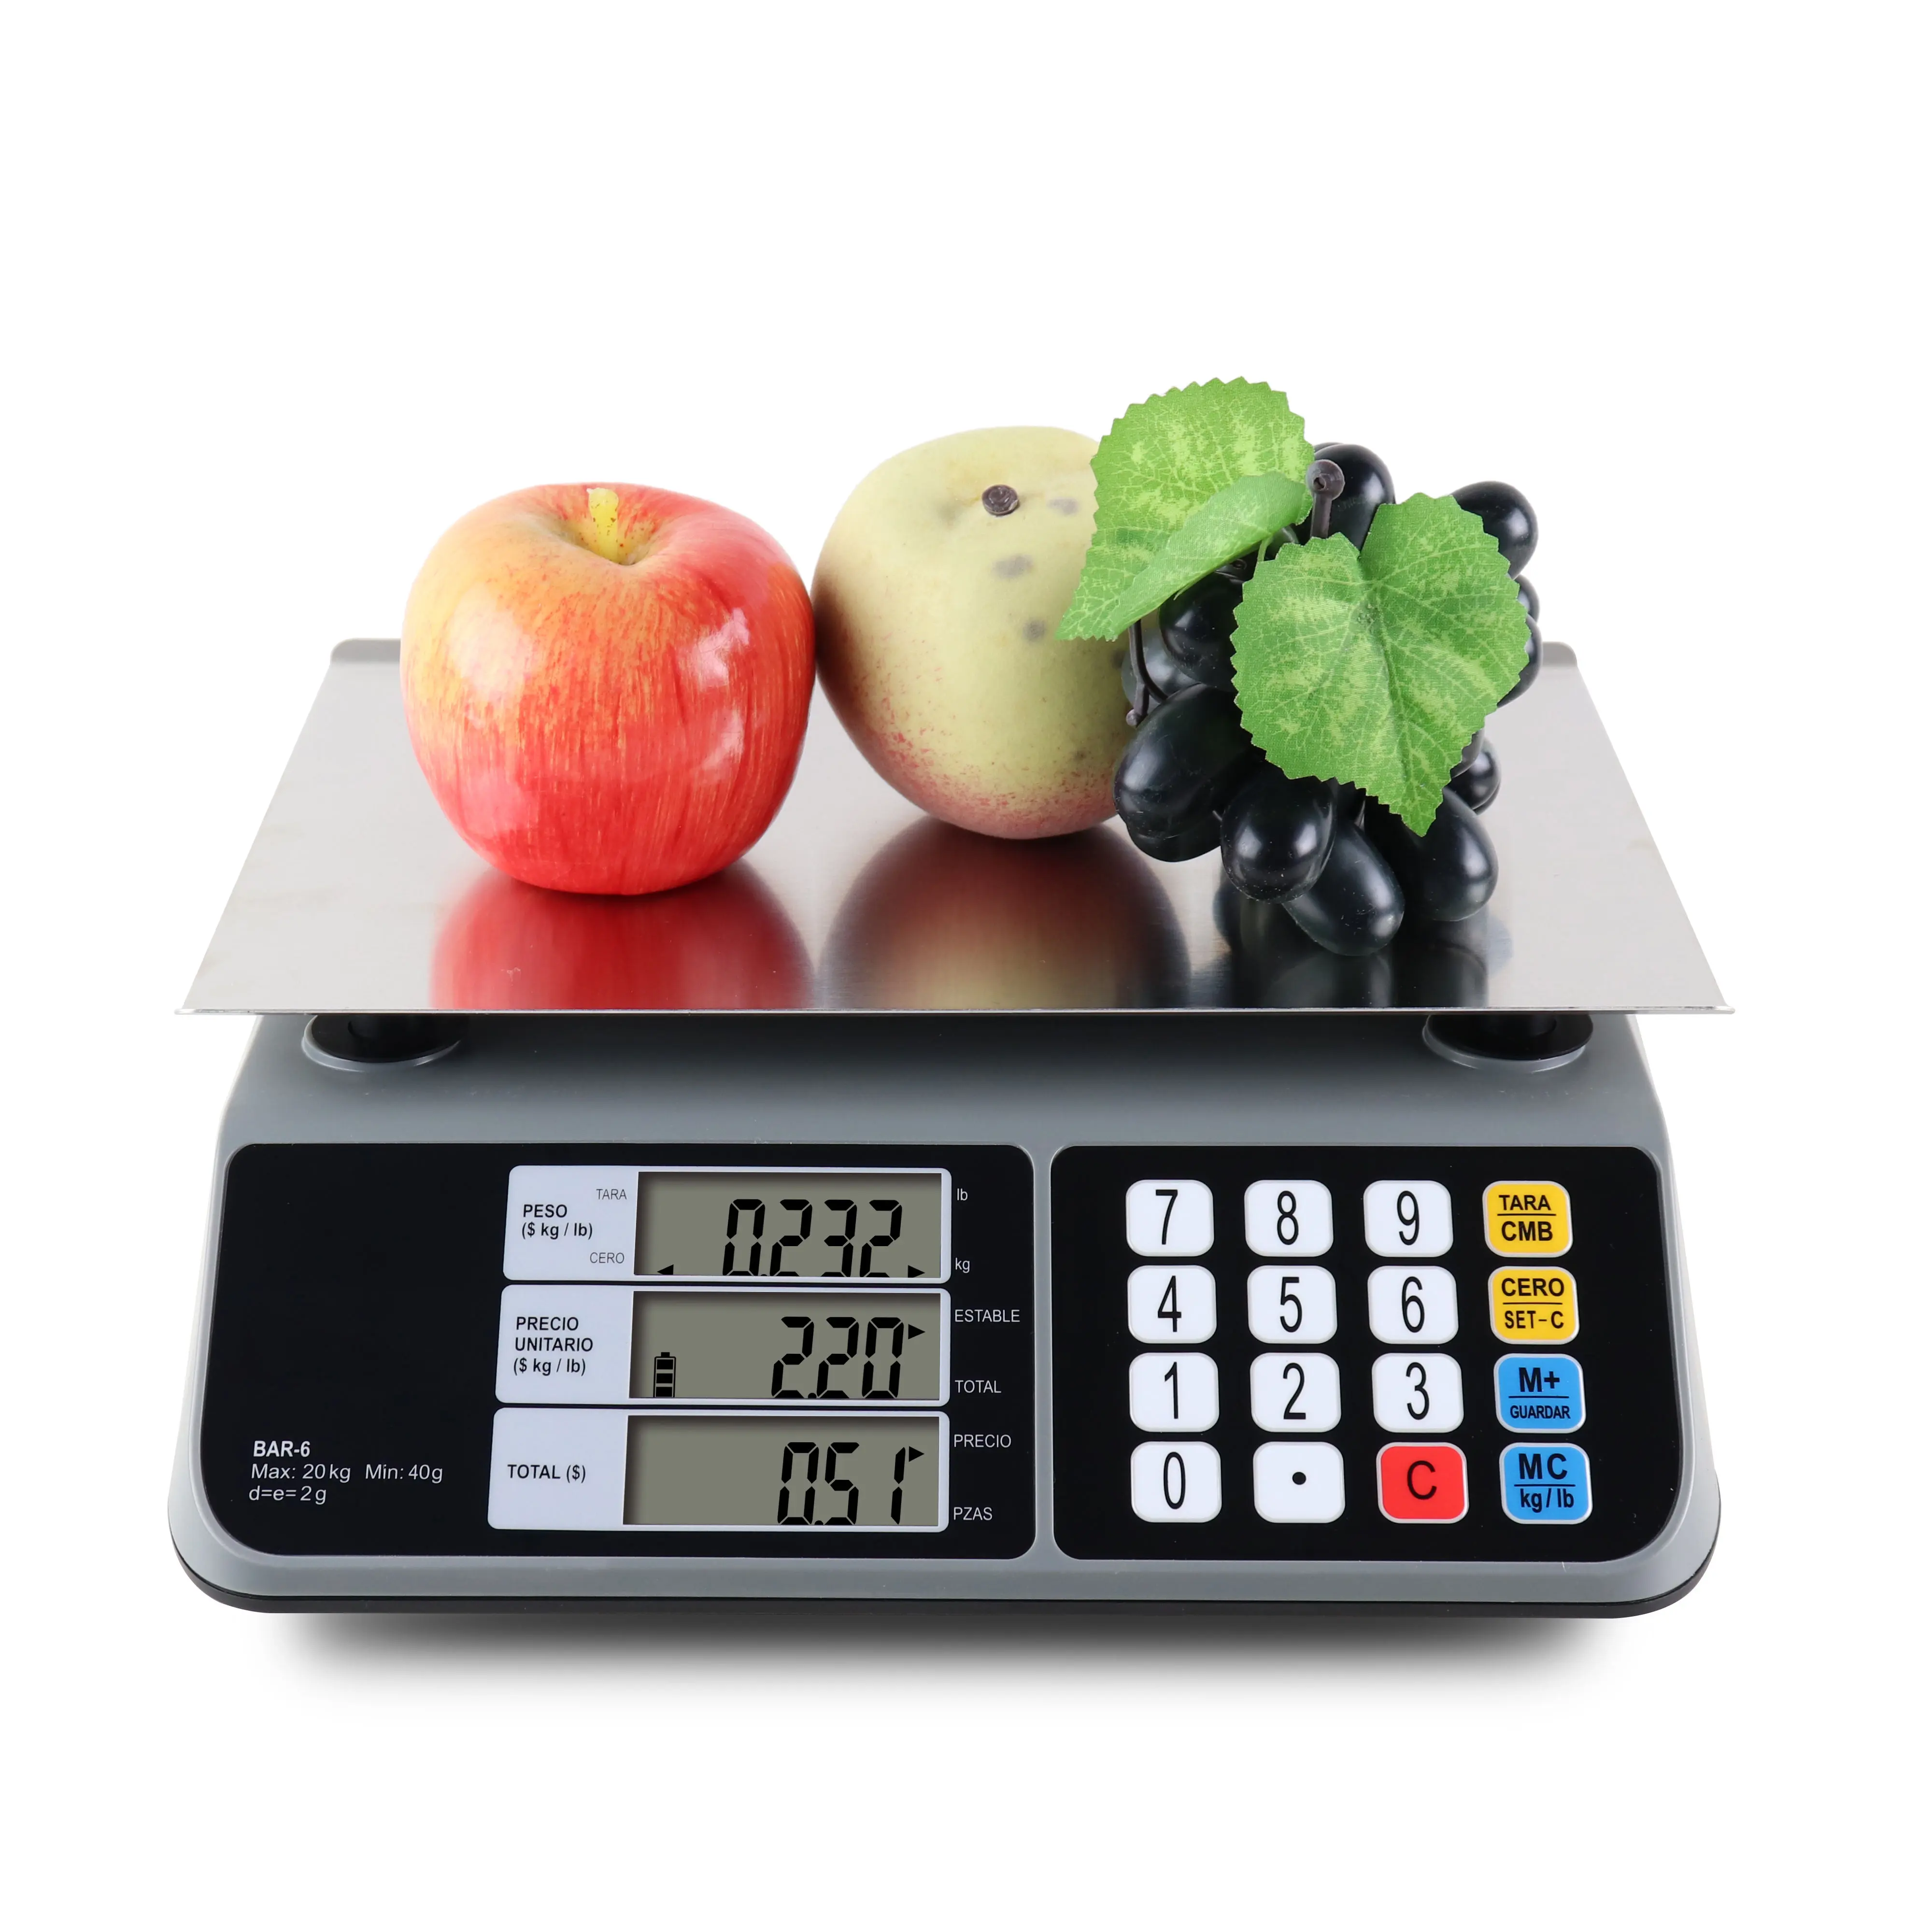 Price Scale 16 Keys Unit Price Amount Counting Dual Display Electric 20k Digital Price Computing Scales